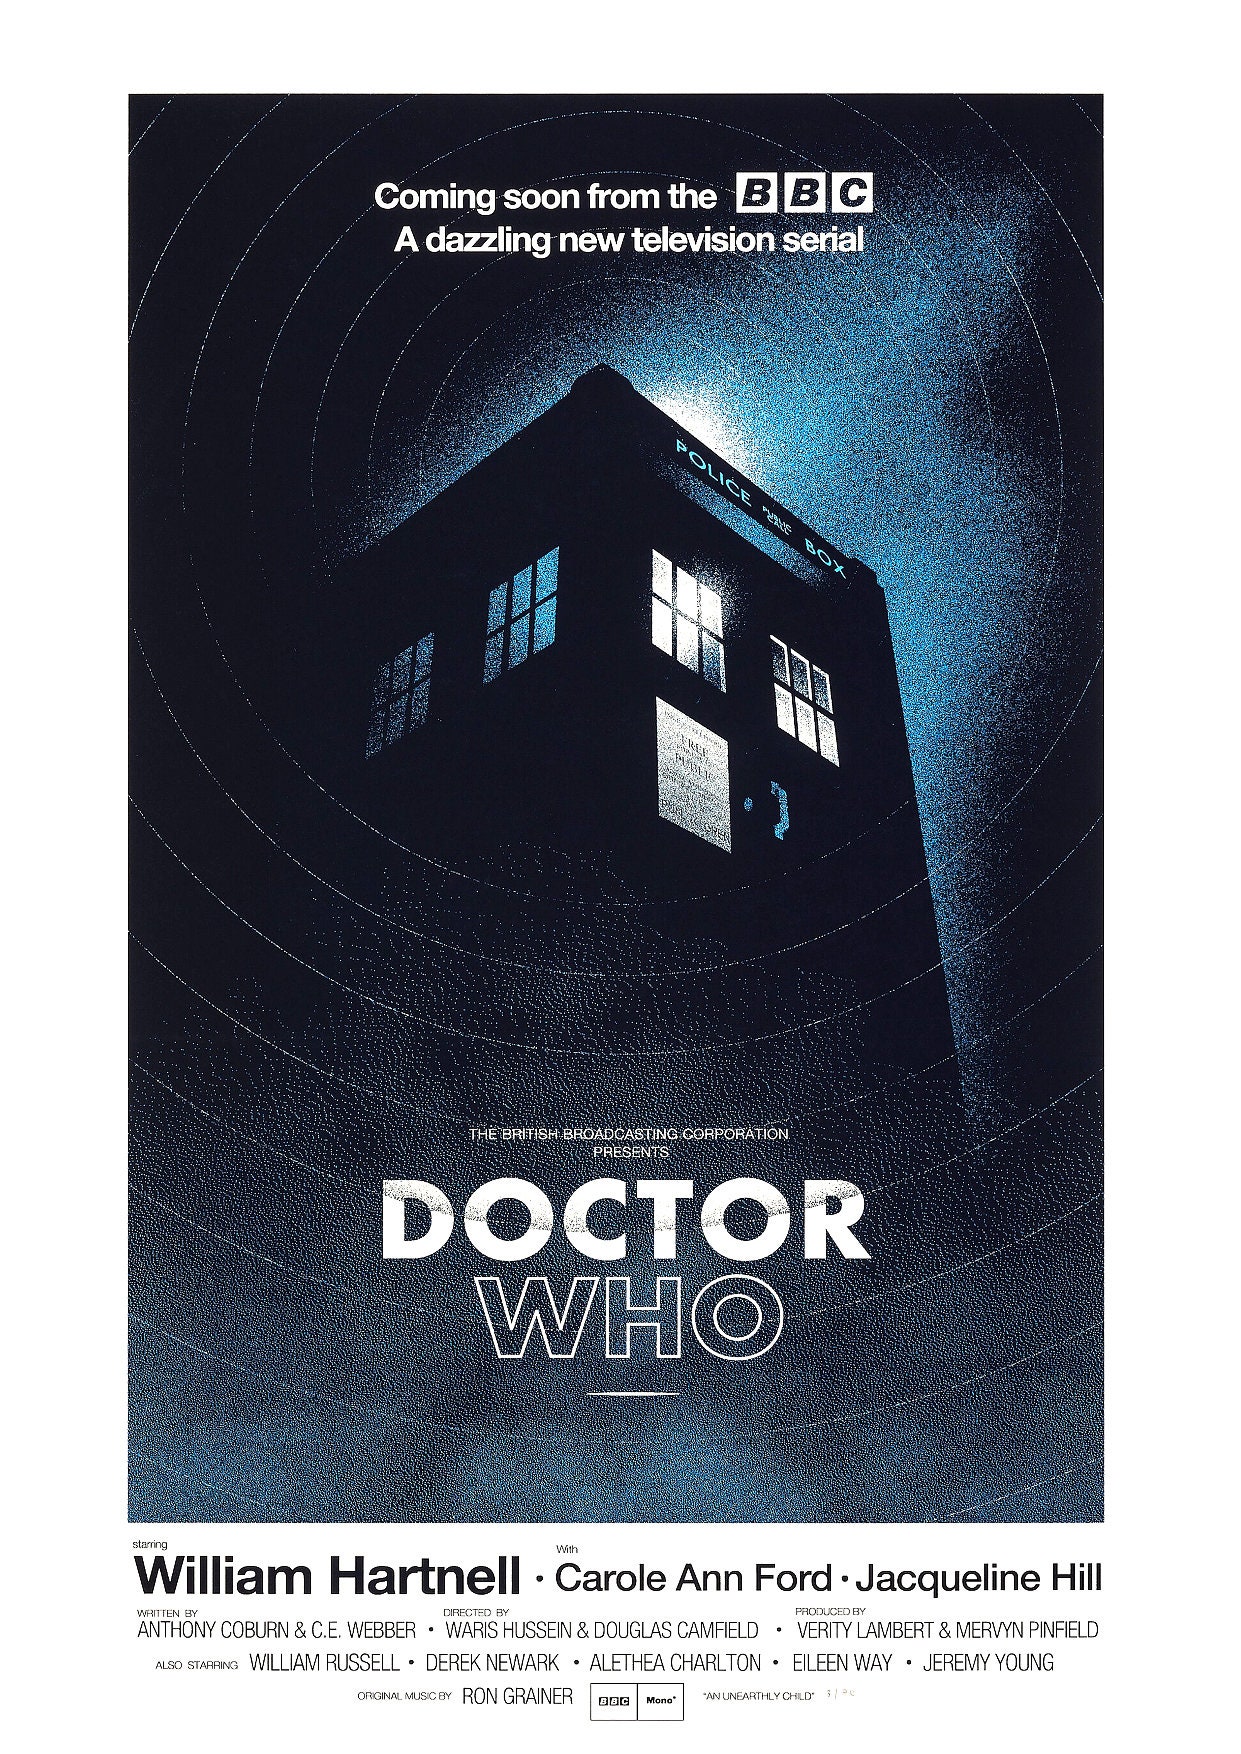 Discover Doctor Who Series Alternative Launch Poster